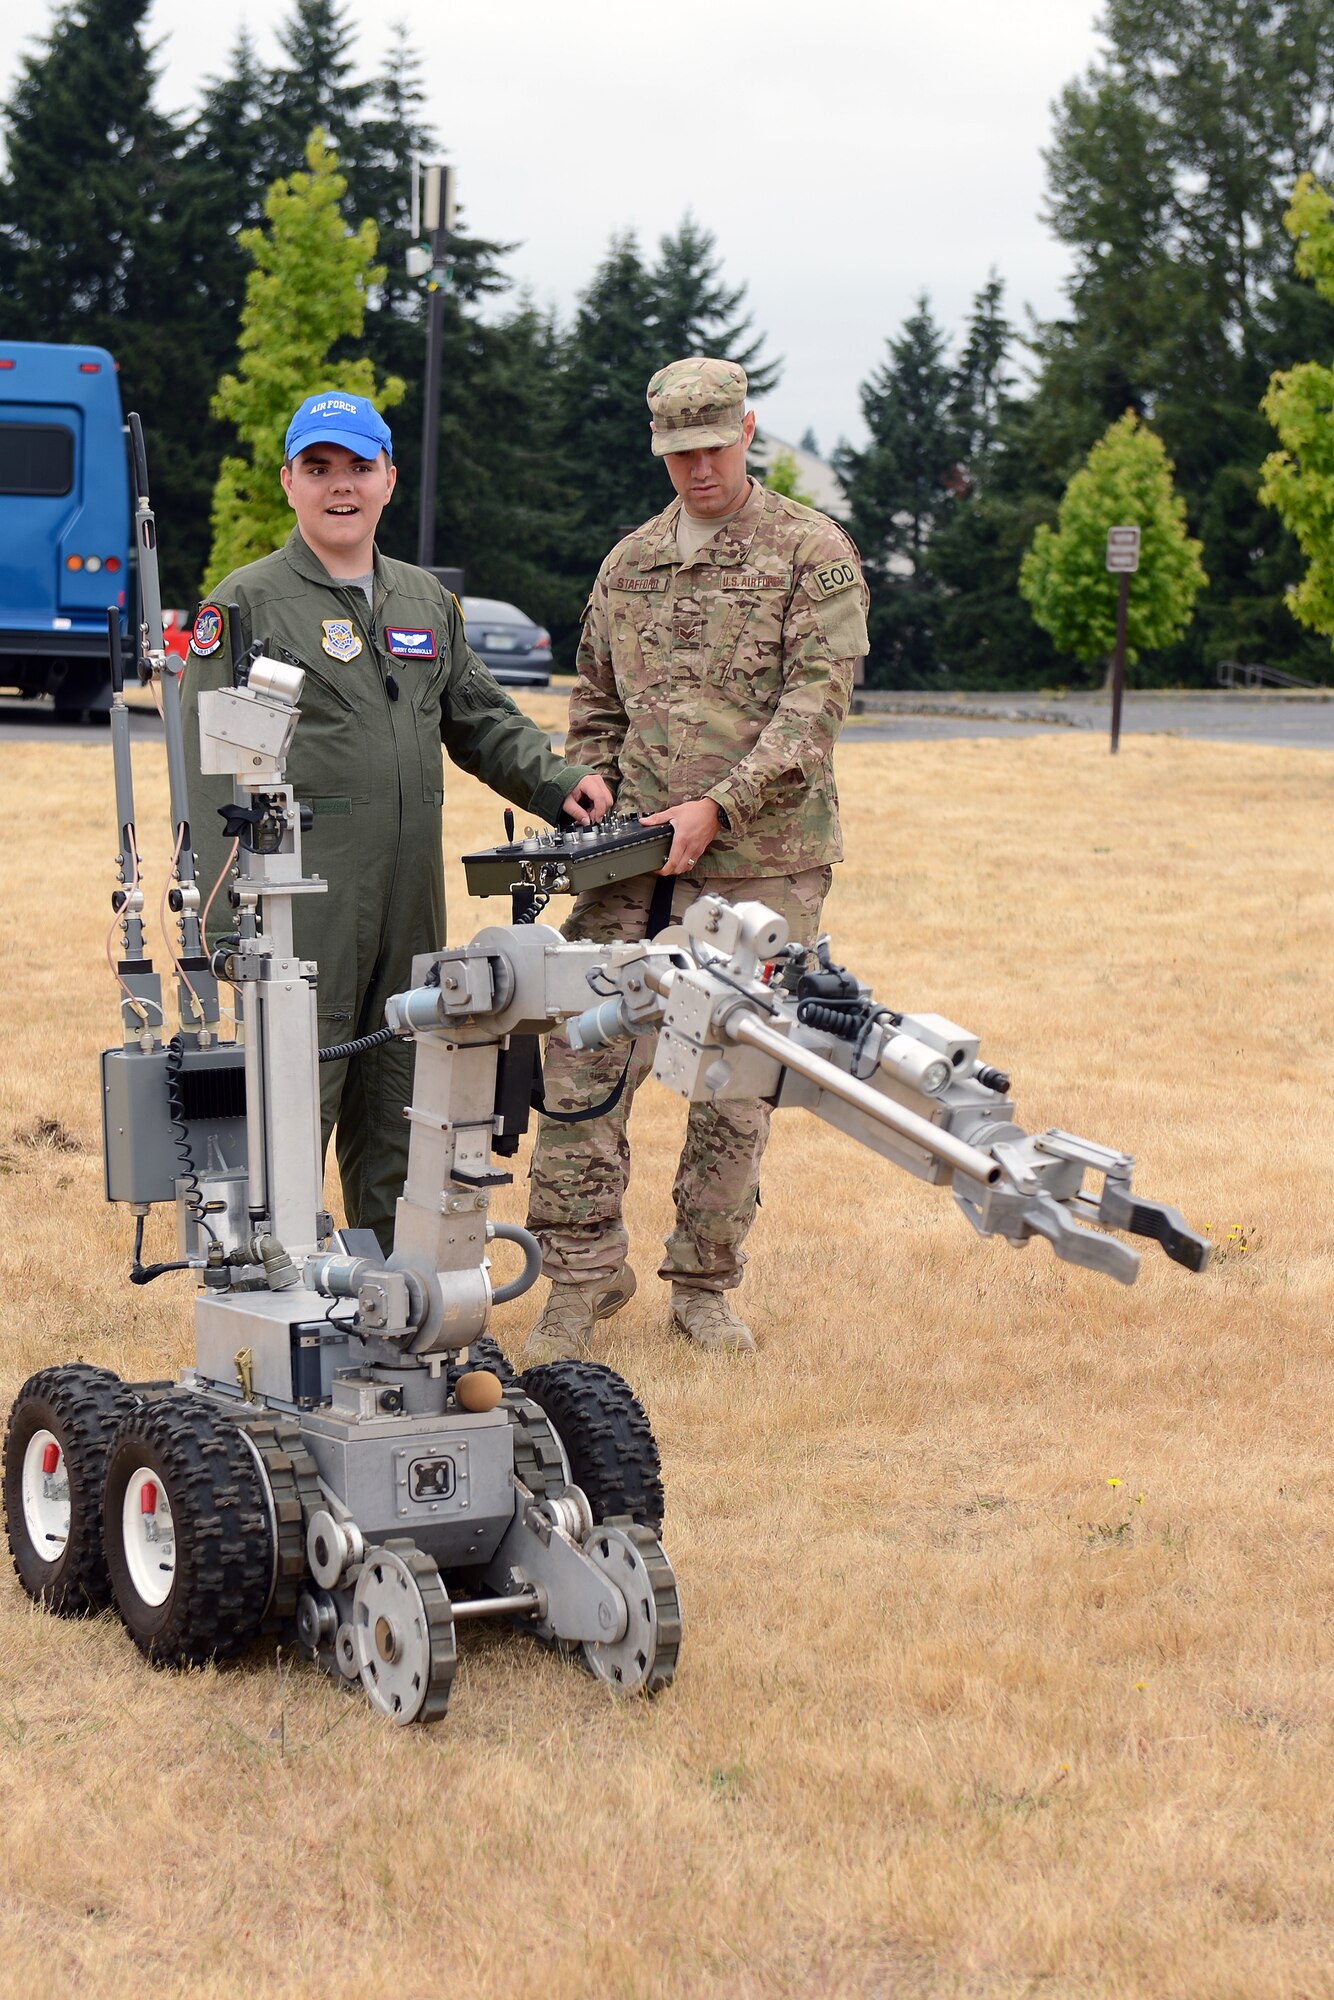 Jerry Connolly(left), 4th Airlift Squadron’s pilot for a day, operates an explosive ordnance disposal robot with Senior Airman Mark Stafford, 627th Civil Engineer Squadron EOD technician, July 14, 2014, at Joint Base Lewis-McChord, Wash. While visiting EOD, Connolly got to pull the trigger to detonate explosives on the EOD range. (U. S. Air Force photo/Airman 1st Class Jacob Jimenez) 